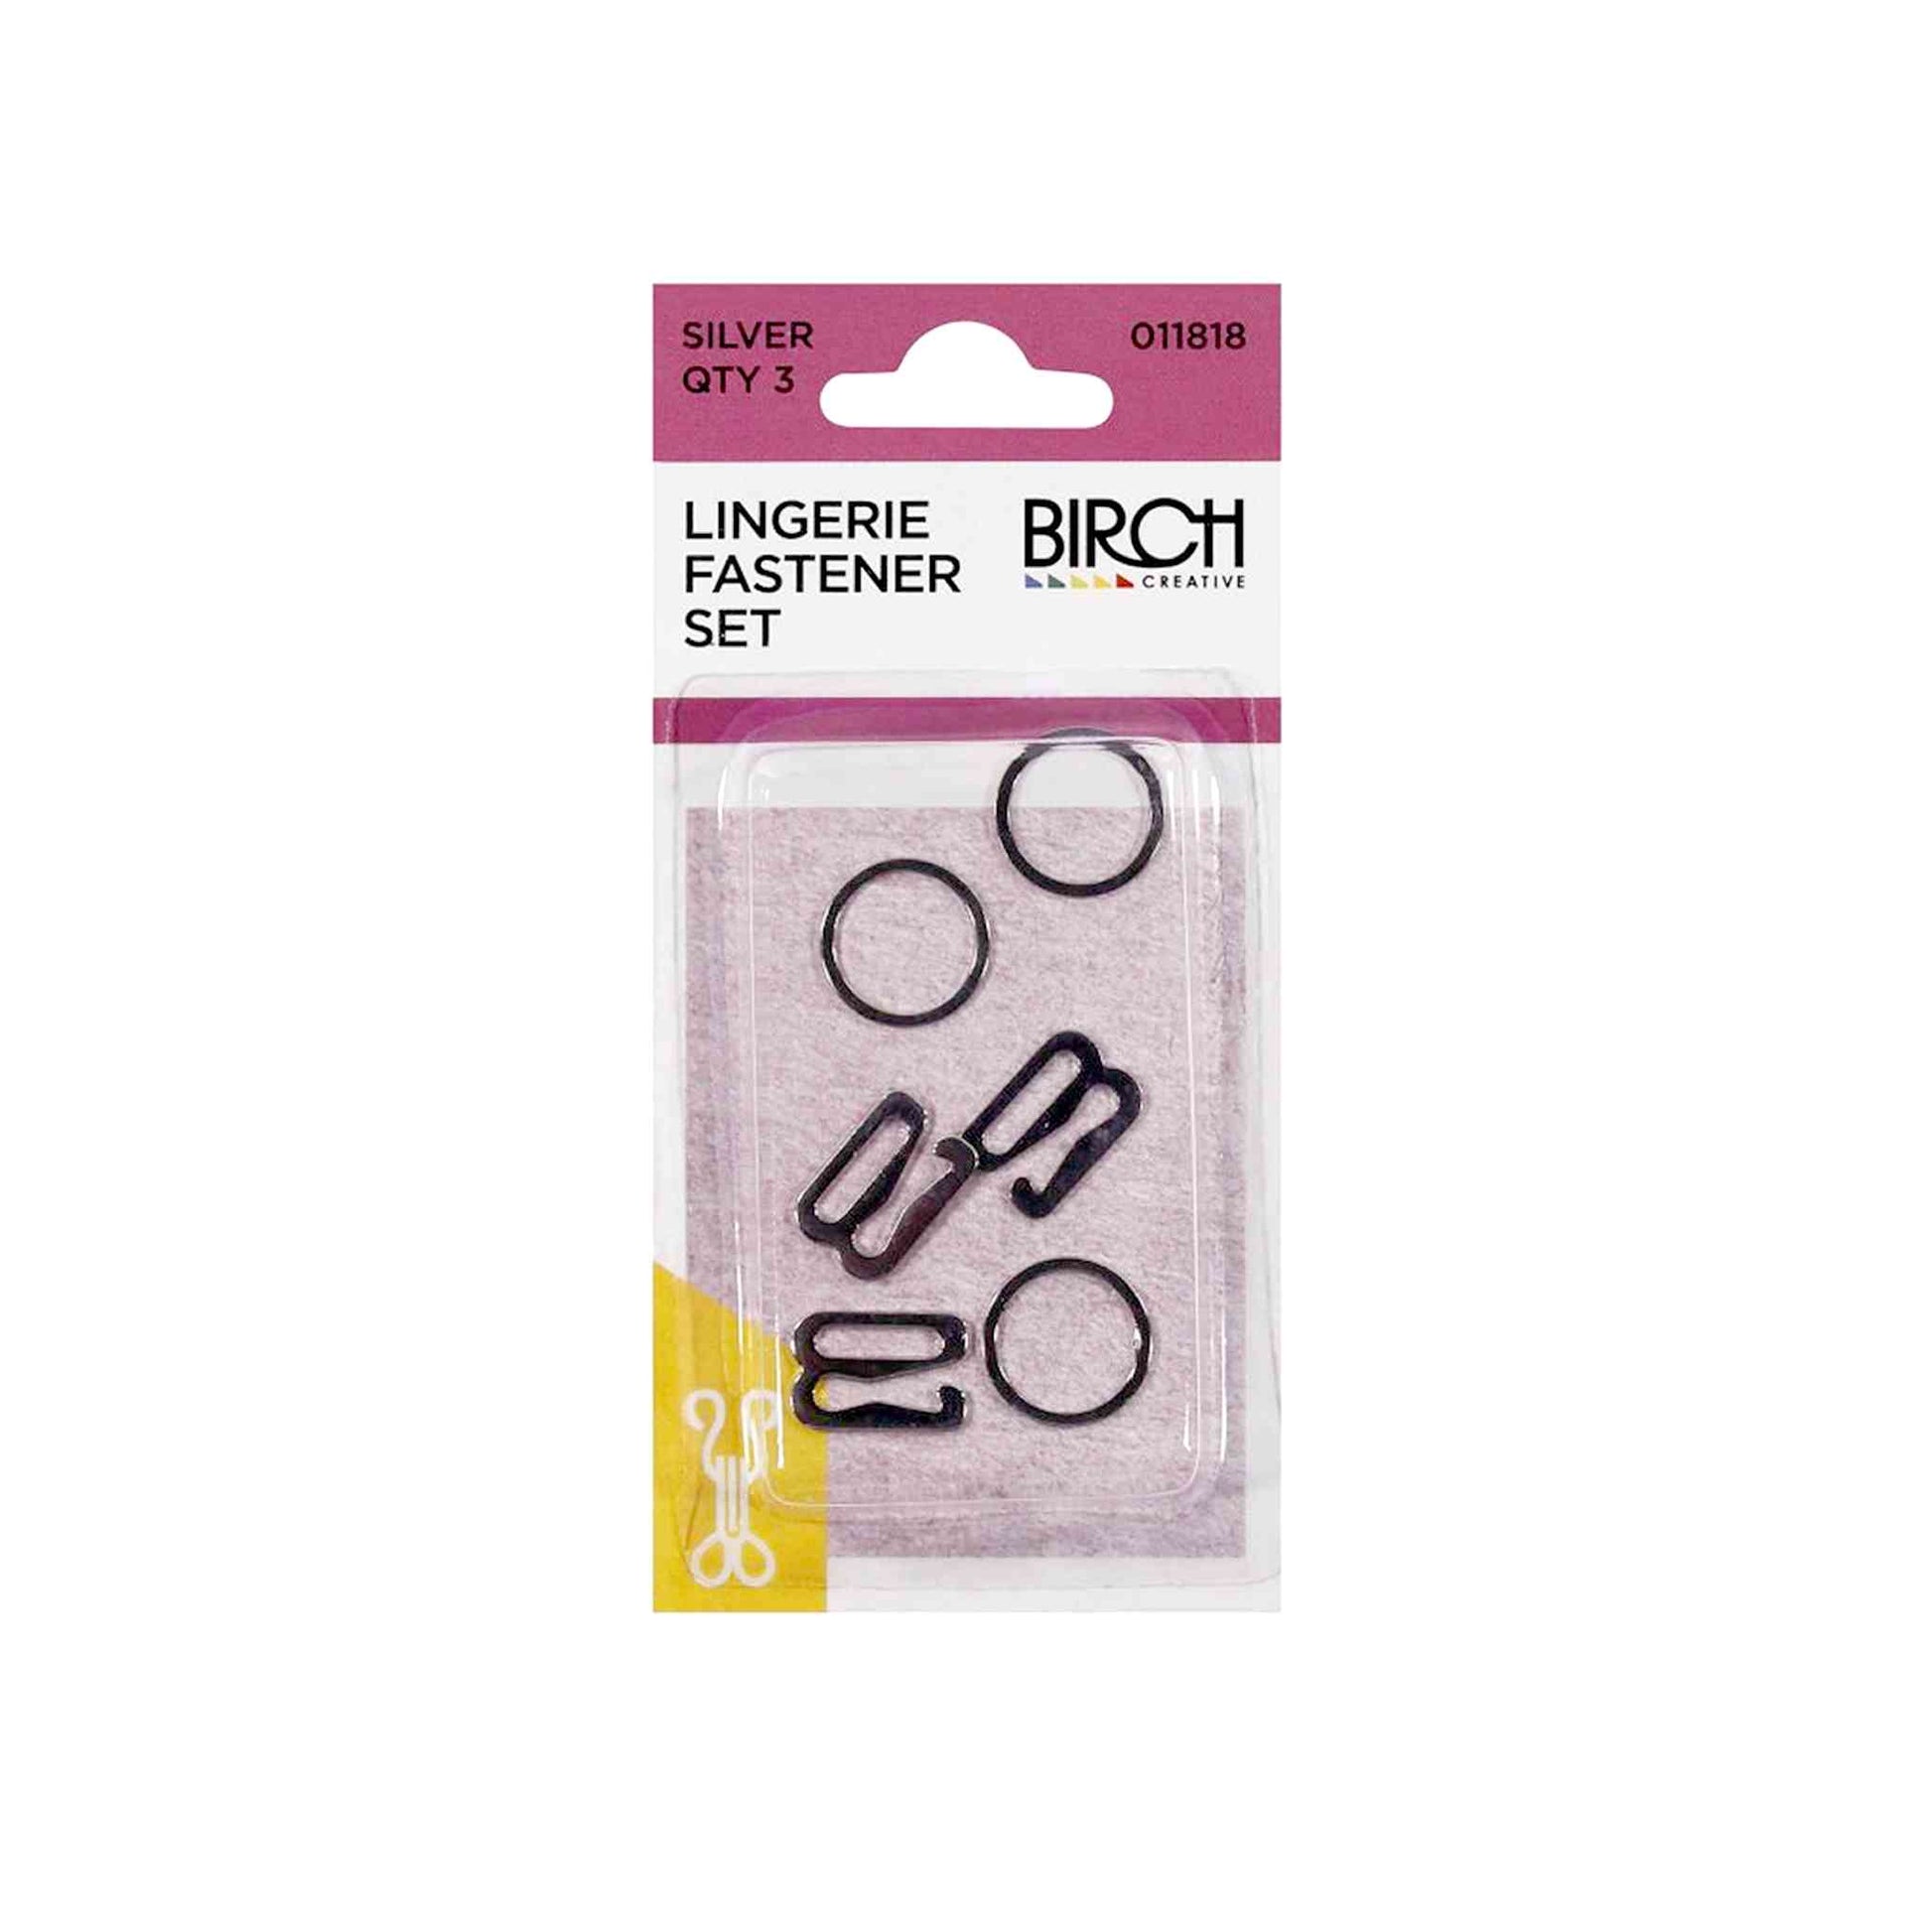 A pack of Birch branded lingerie fastener sets. 3 sets in each pack, nickel in colour.gs.